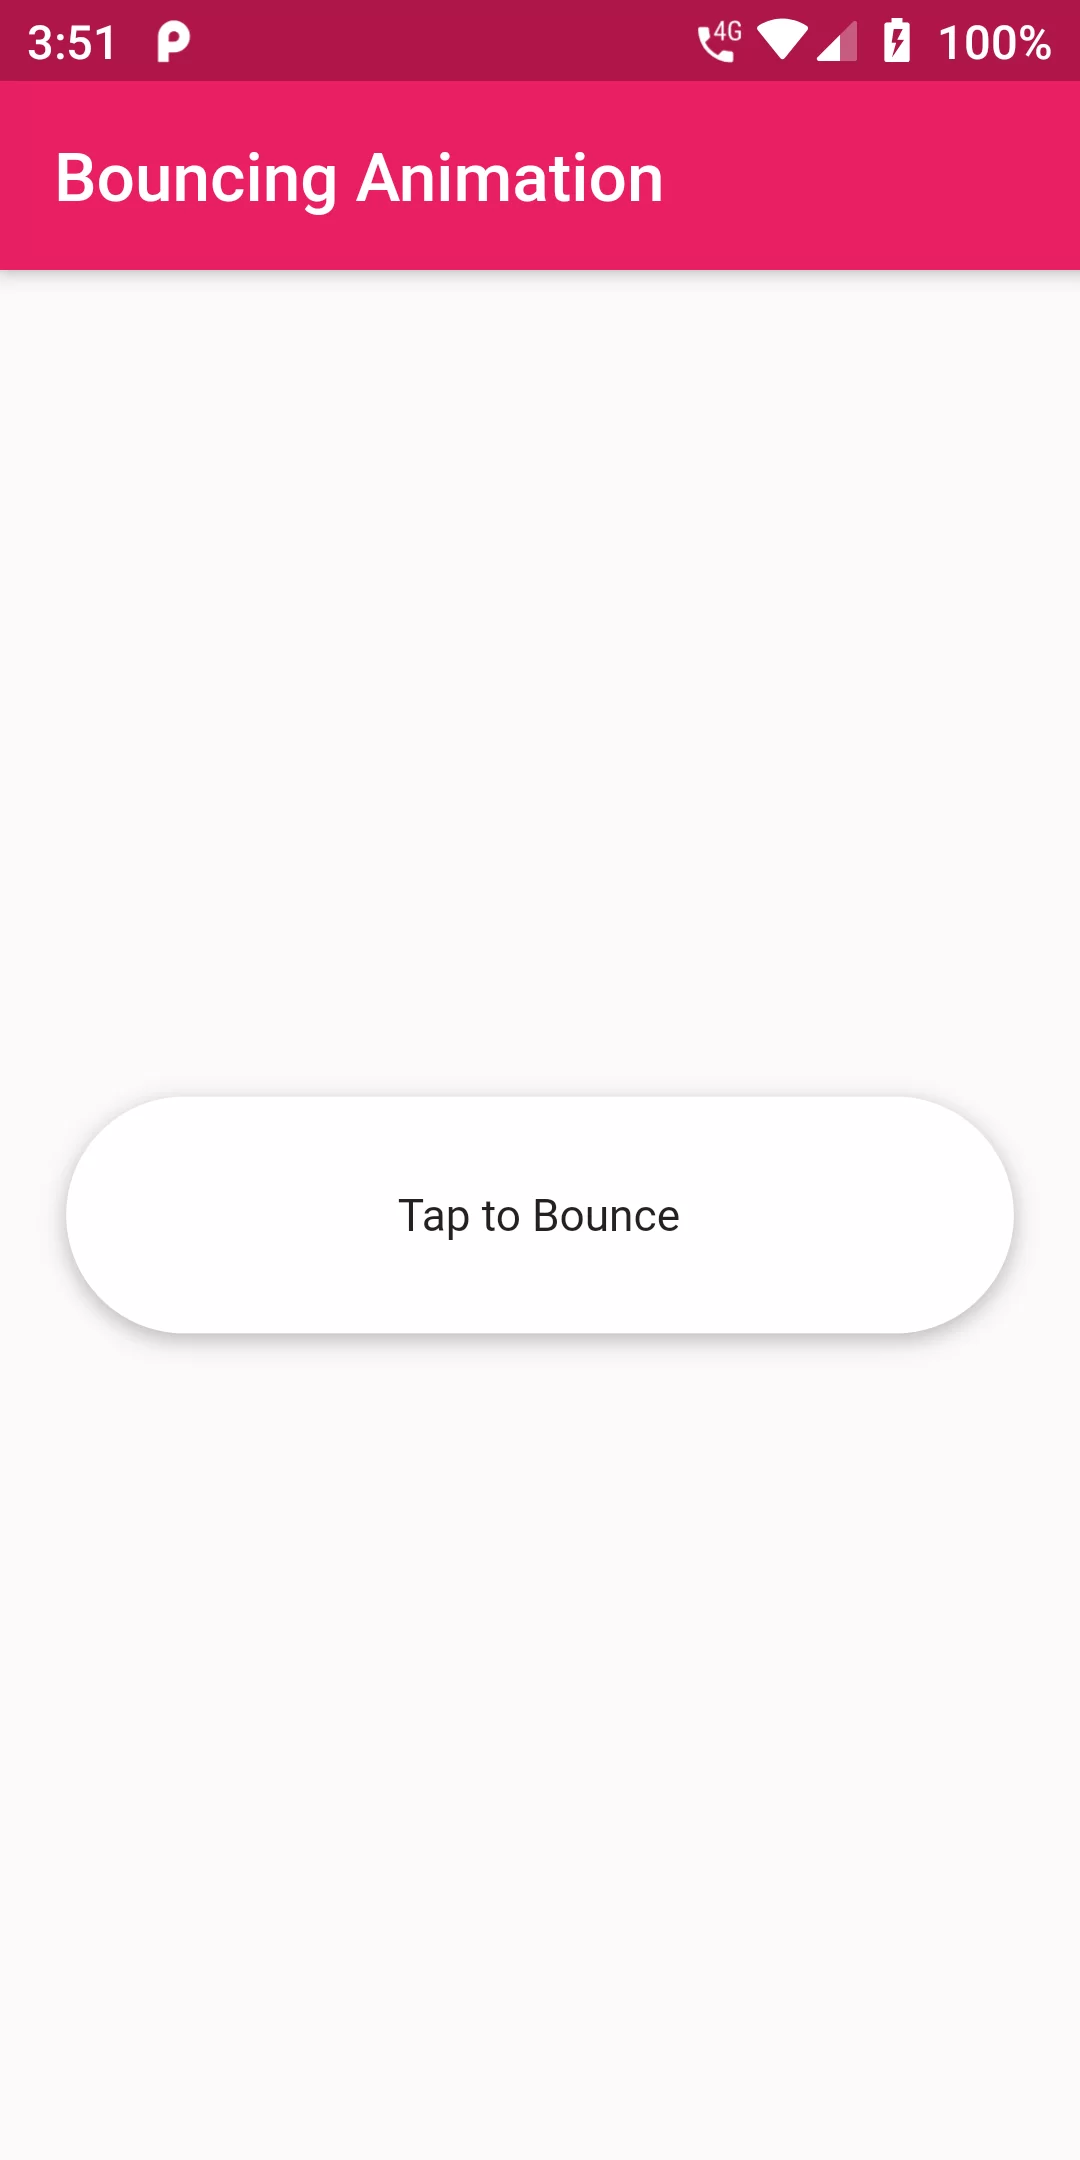 How To Create Bouncing Animation Using Flutter App